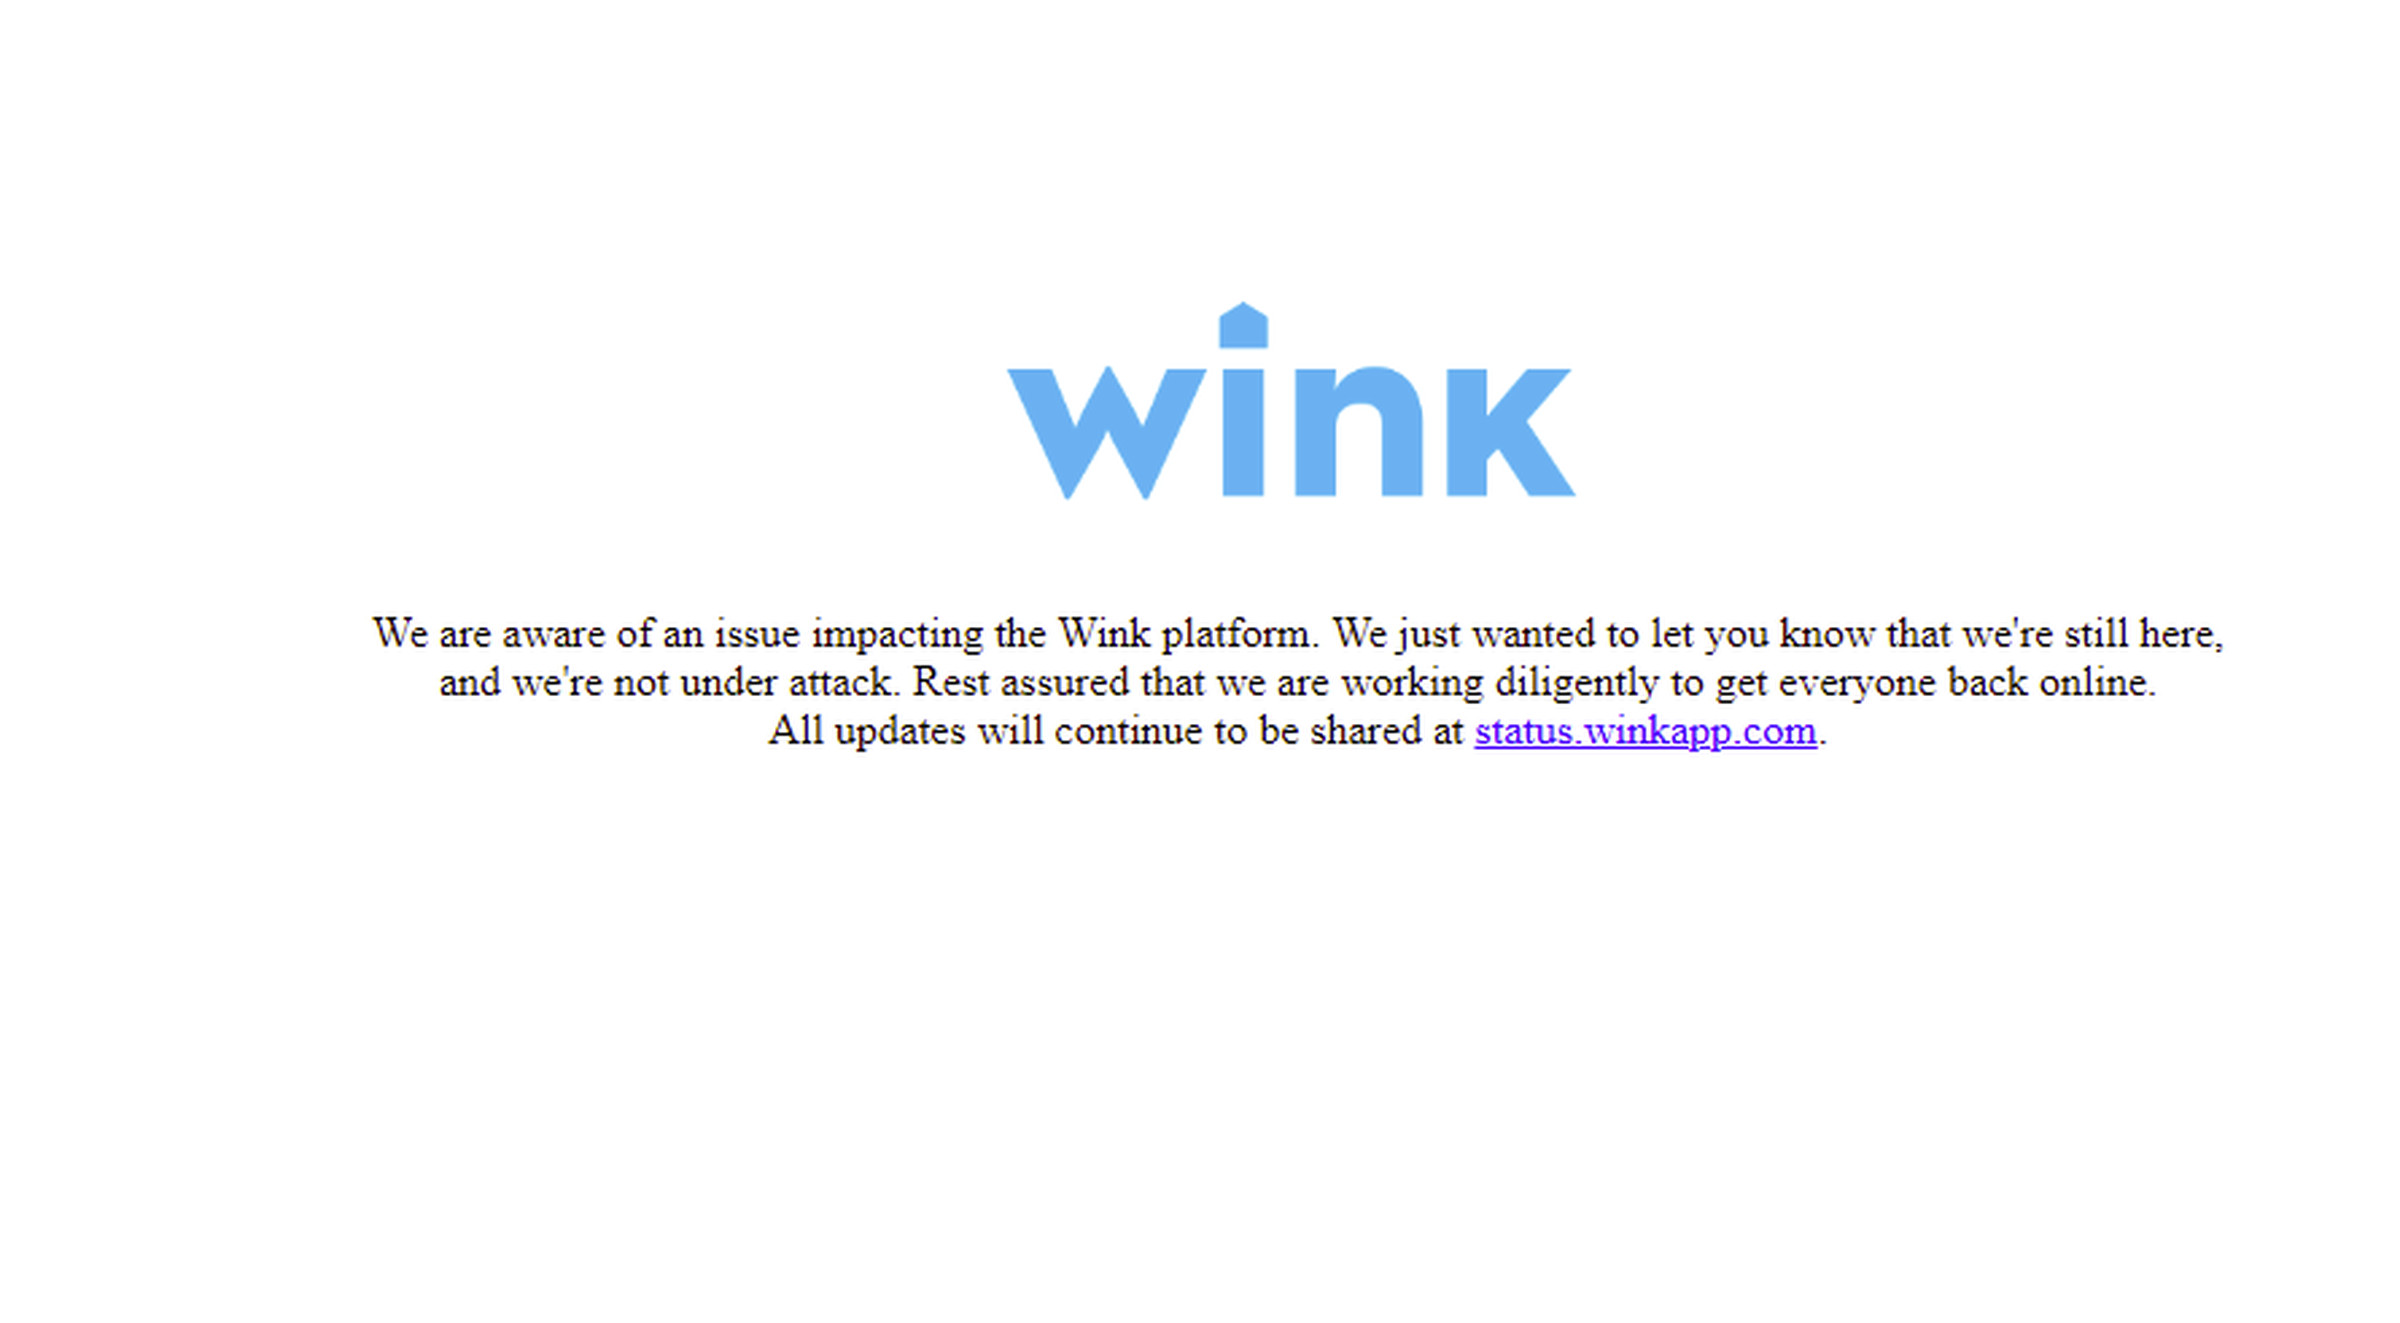 Wink’s current message on its website explaining the outage.